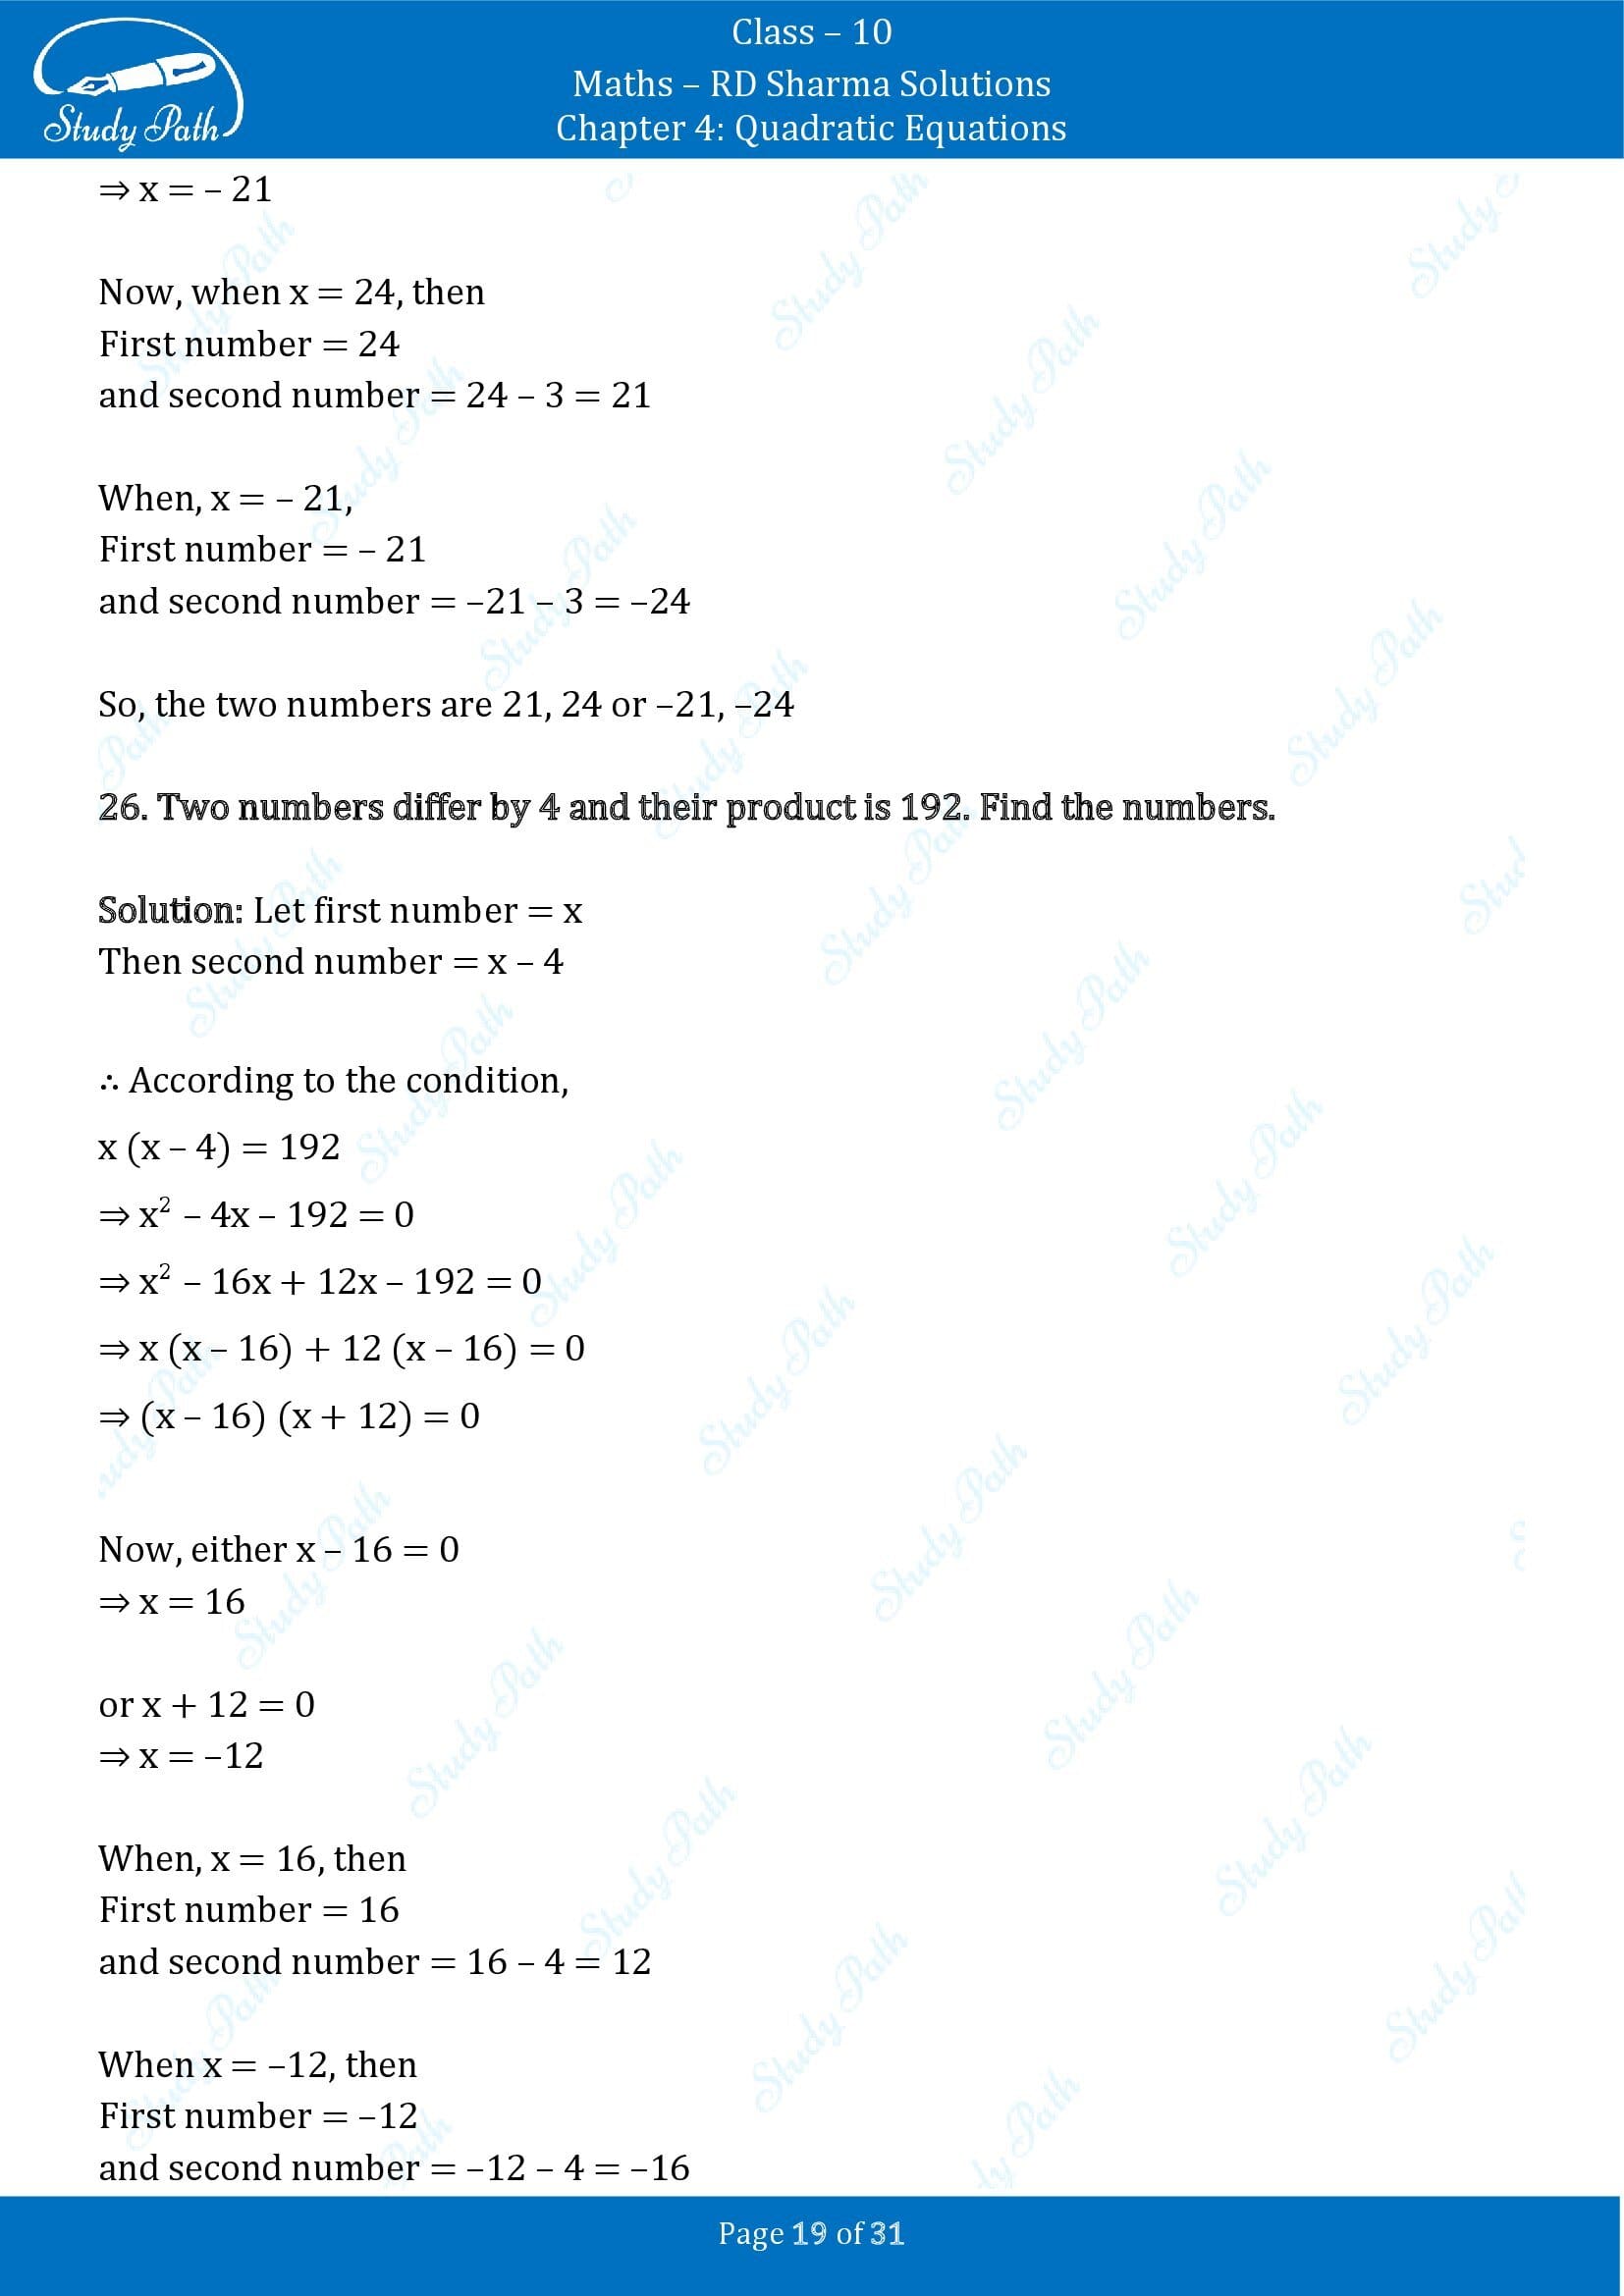 RD Sharma Solutions Class 10 Chapter 4 Quadratic Equations Exercise 4.7 00019